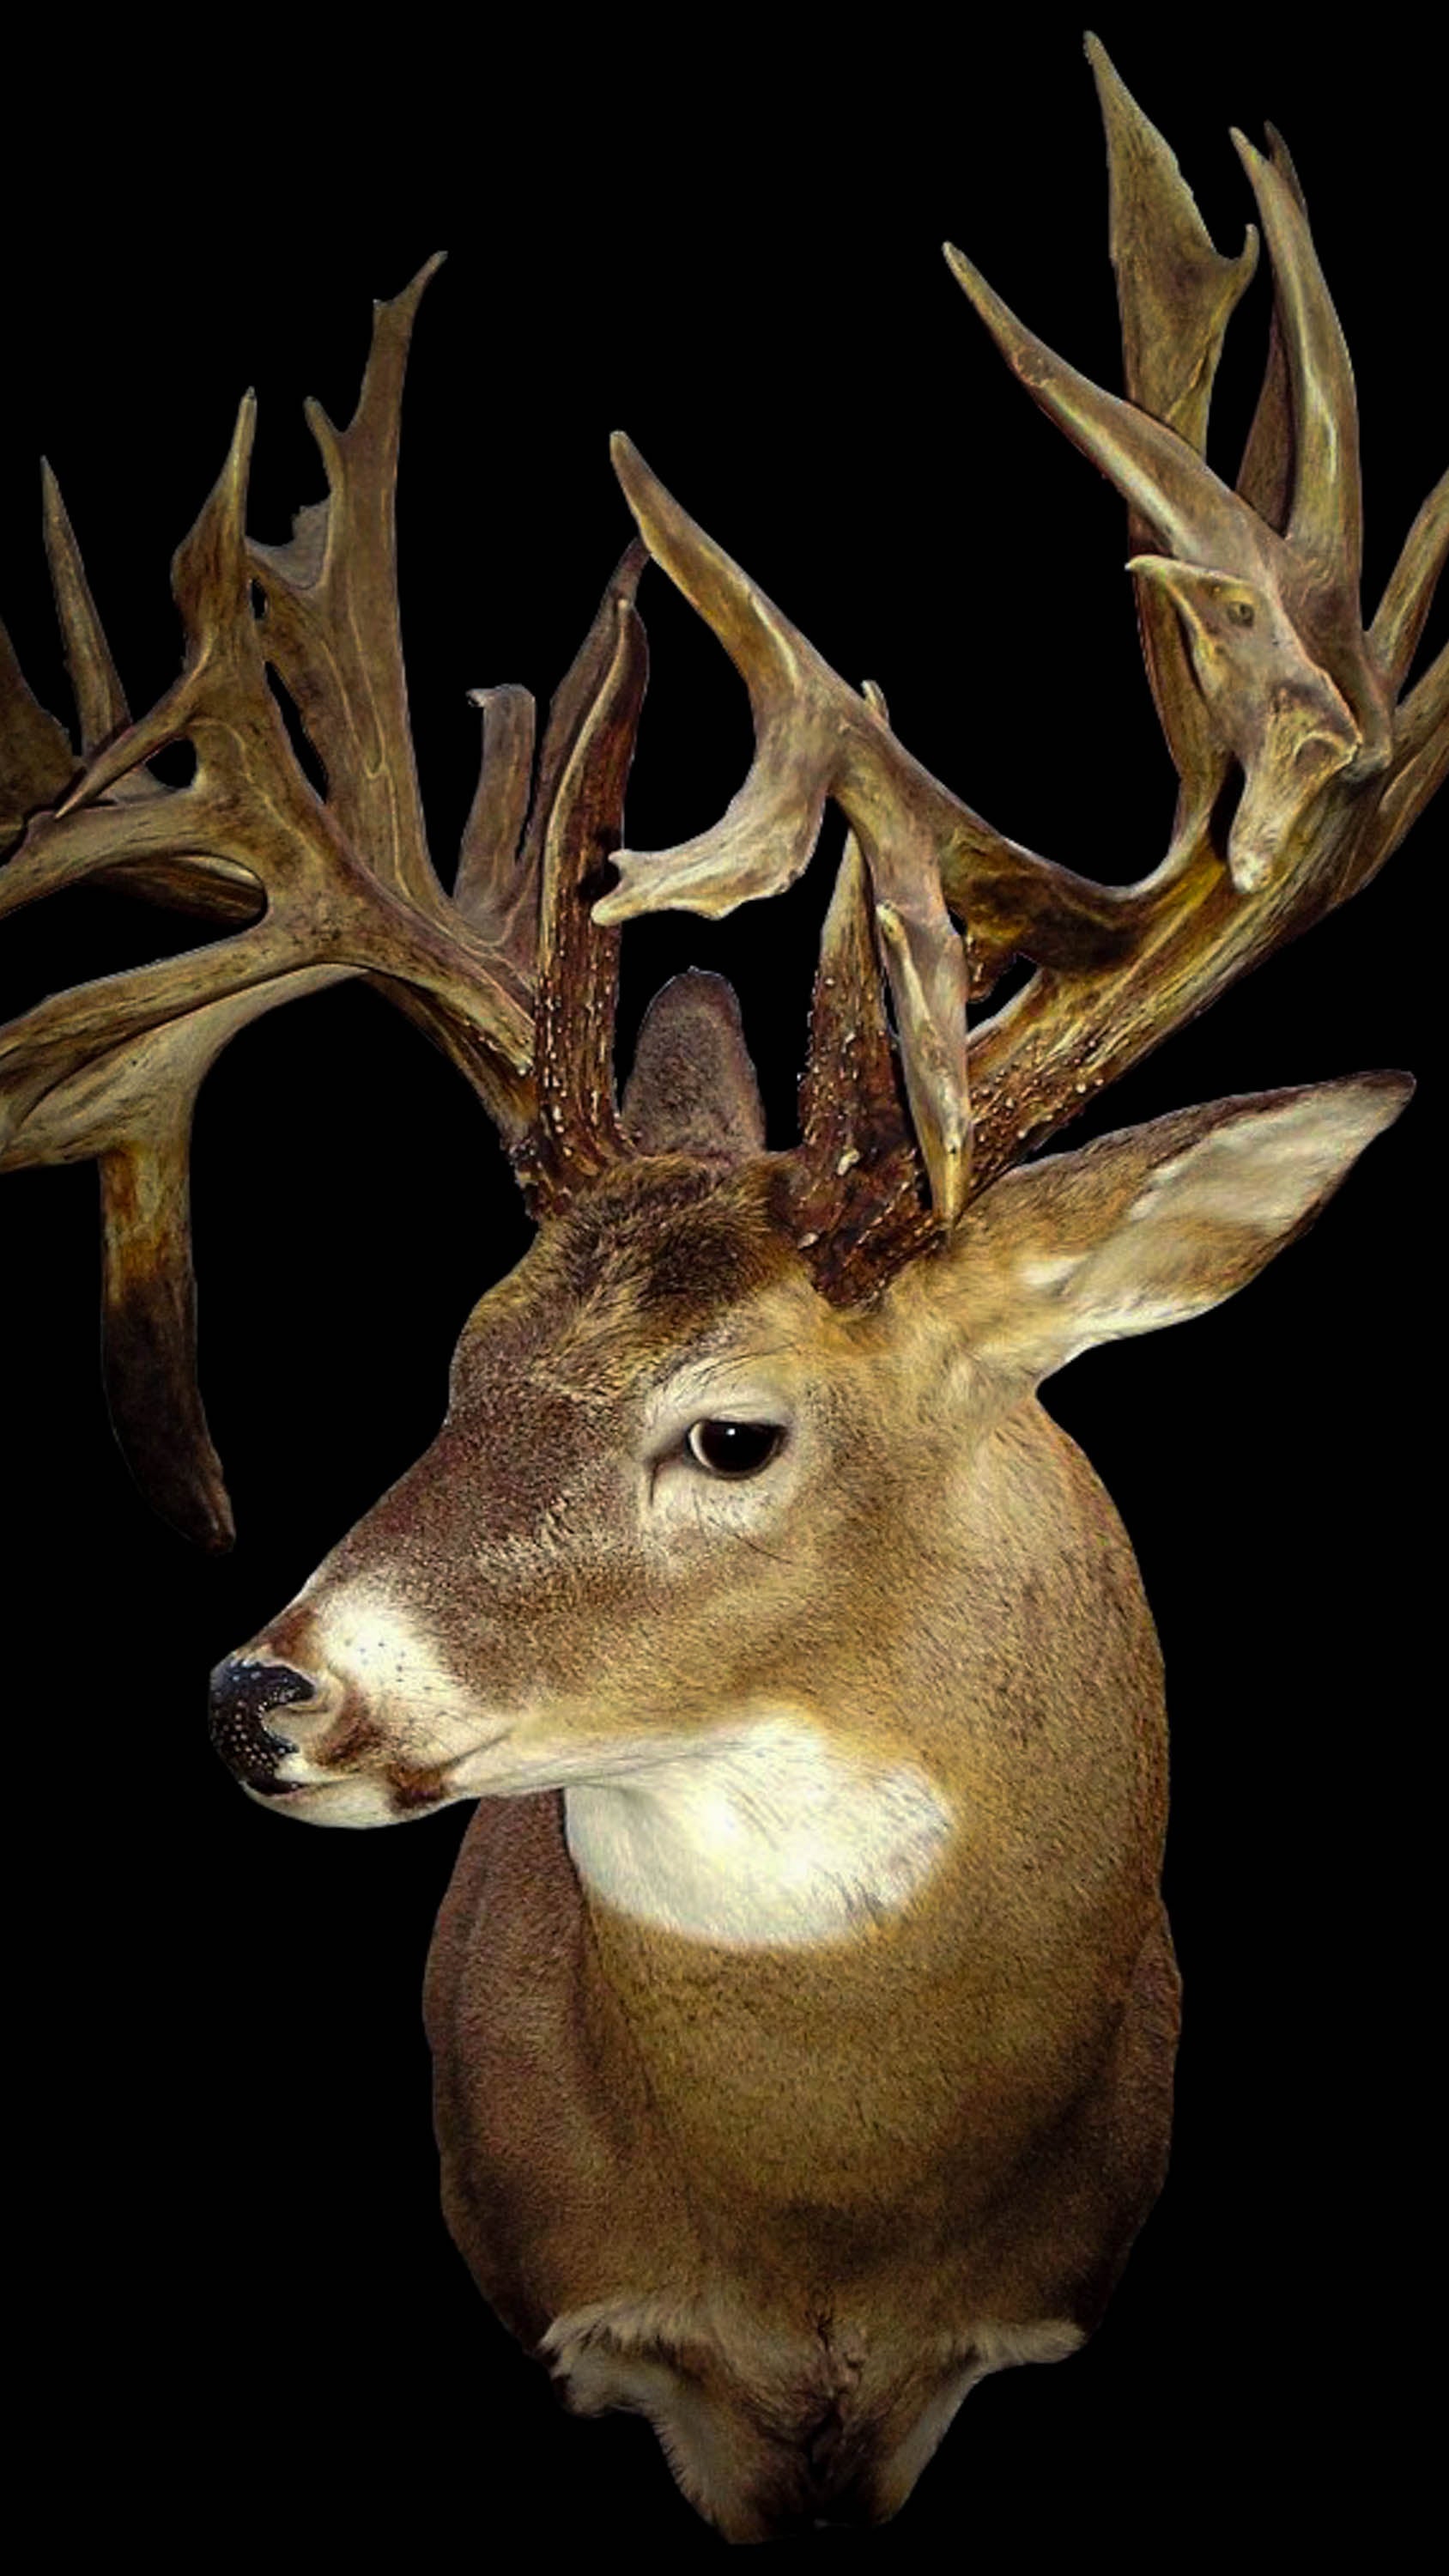 The Minnesota Monarch: The Story of a Legendary Whitetail Buck in Northern Minnesota